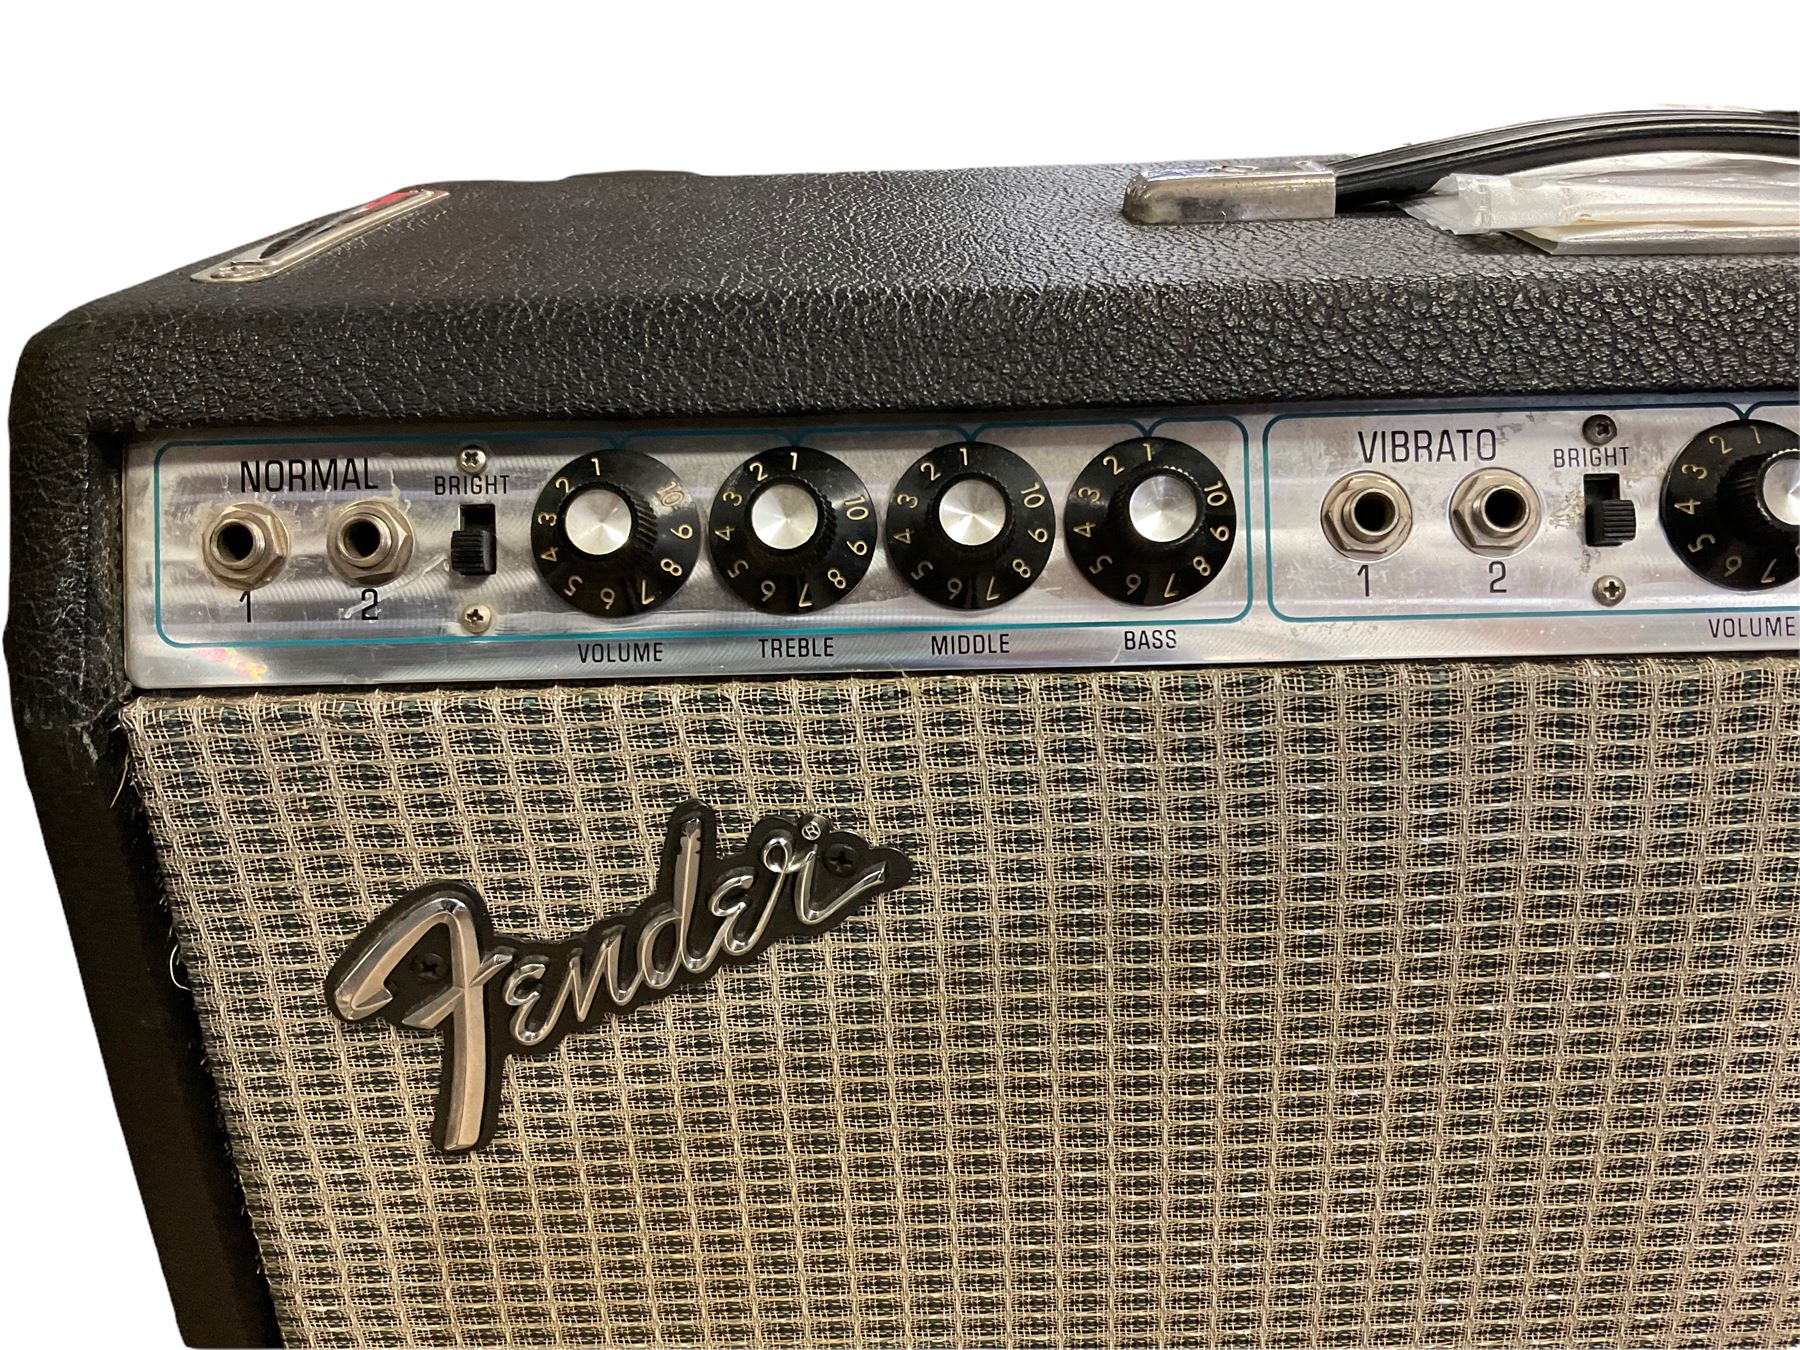 1970s Fender Twin Reverb professional amplifier No.A66744 - Image 4 of 12